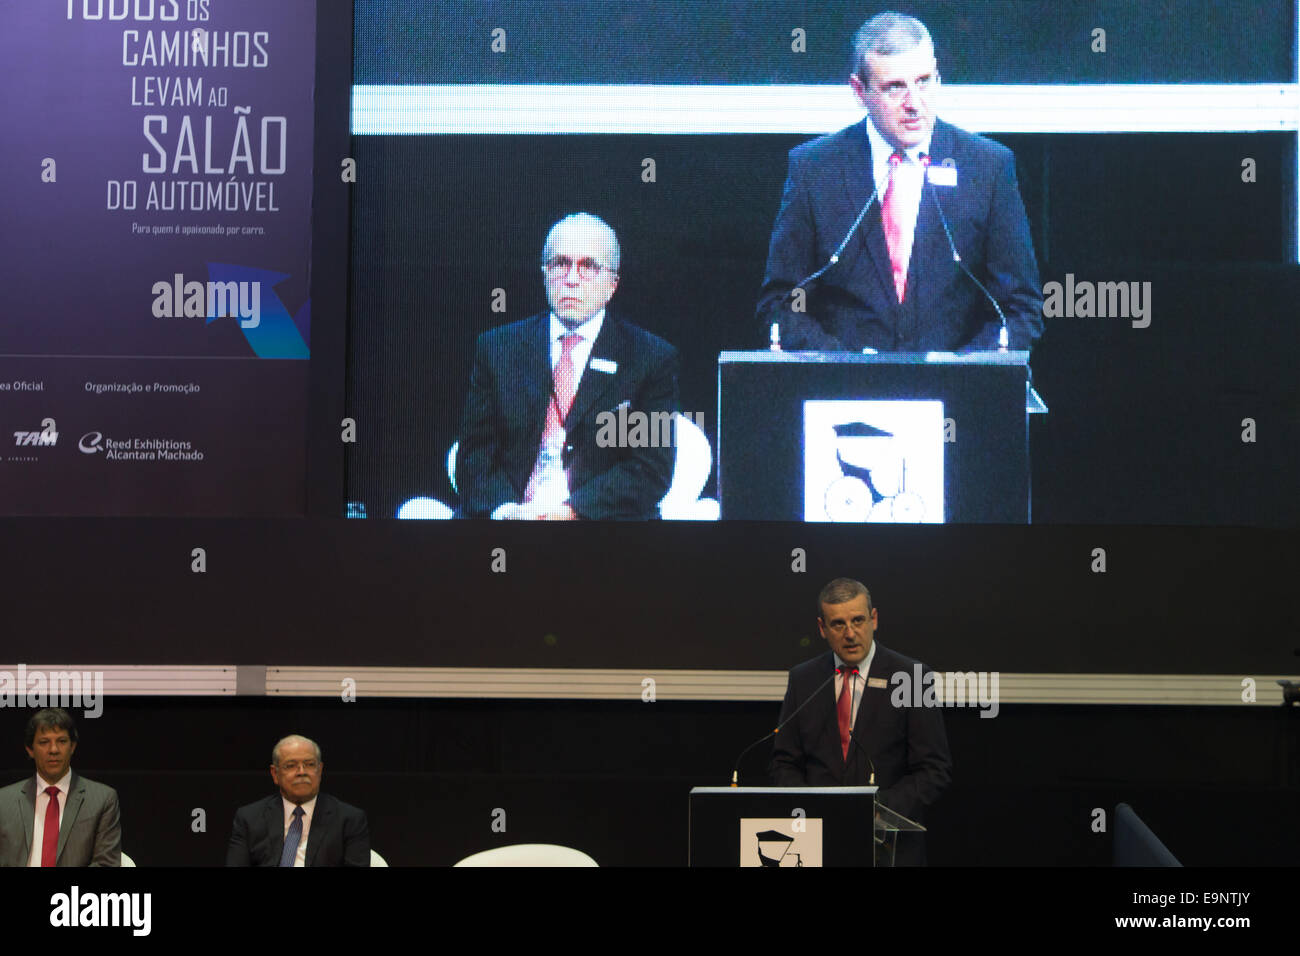 Sao Paulo, Brazil. 30th October, 2014. Juan Pablo De Vera, President of Reed Exhibitions Alcantara Machado (right), organizer of the automobile show, during the 28th Sao Paulo International Automobile Show official inauguration, held at Anhembi Exhibition Hall on this Thursday (30) afternoon, in Sao Paulo, Brazil. Credit: Andre M. Chang/Alamy Live News Stock Photo